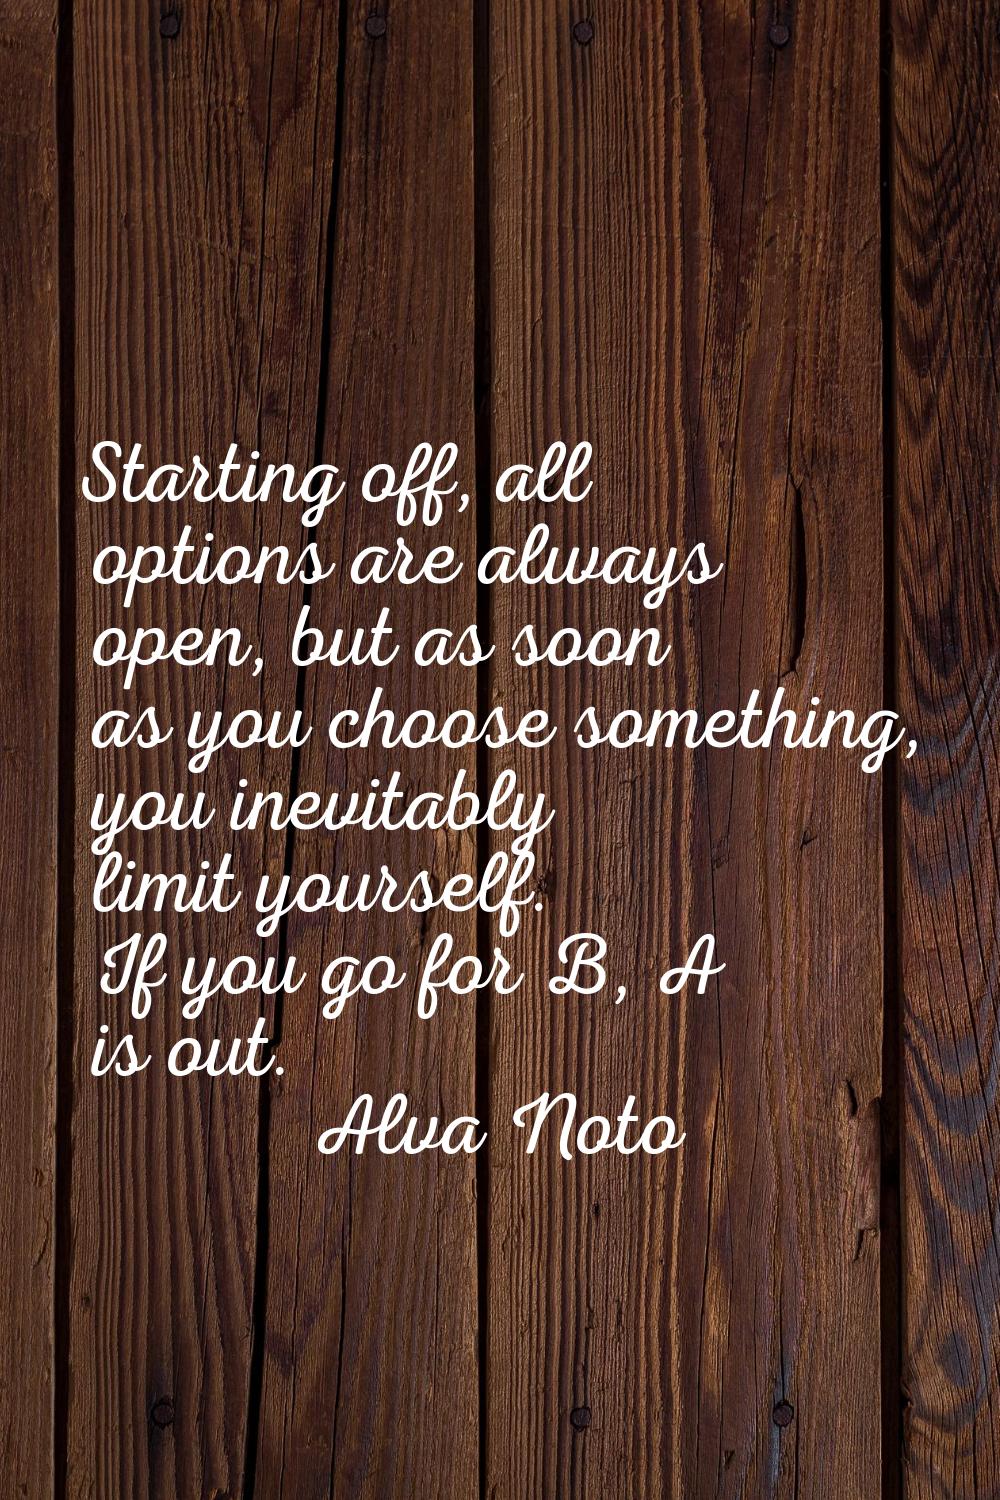 Starting off, all options are always open, but as soon as you choose something, you inevitably limi